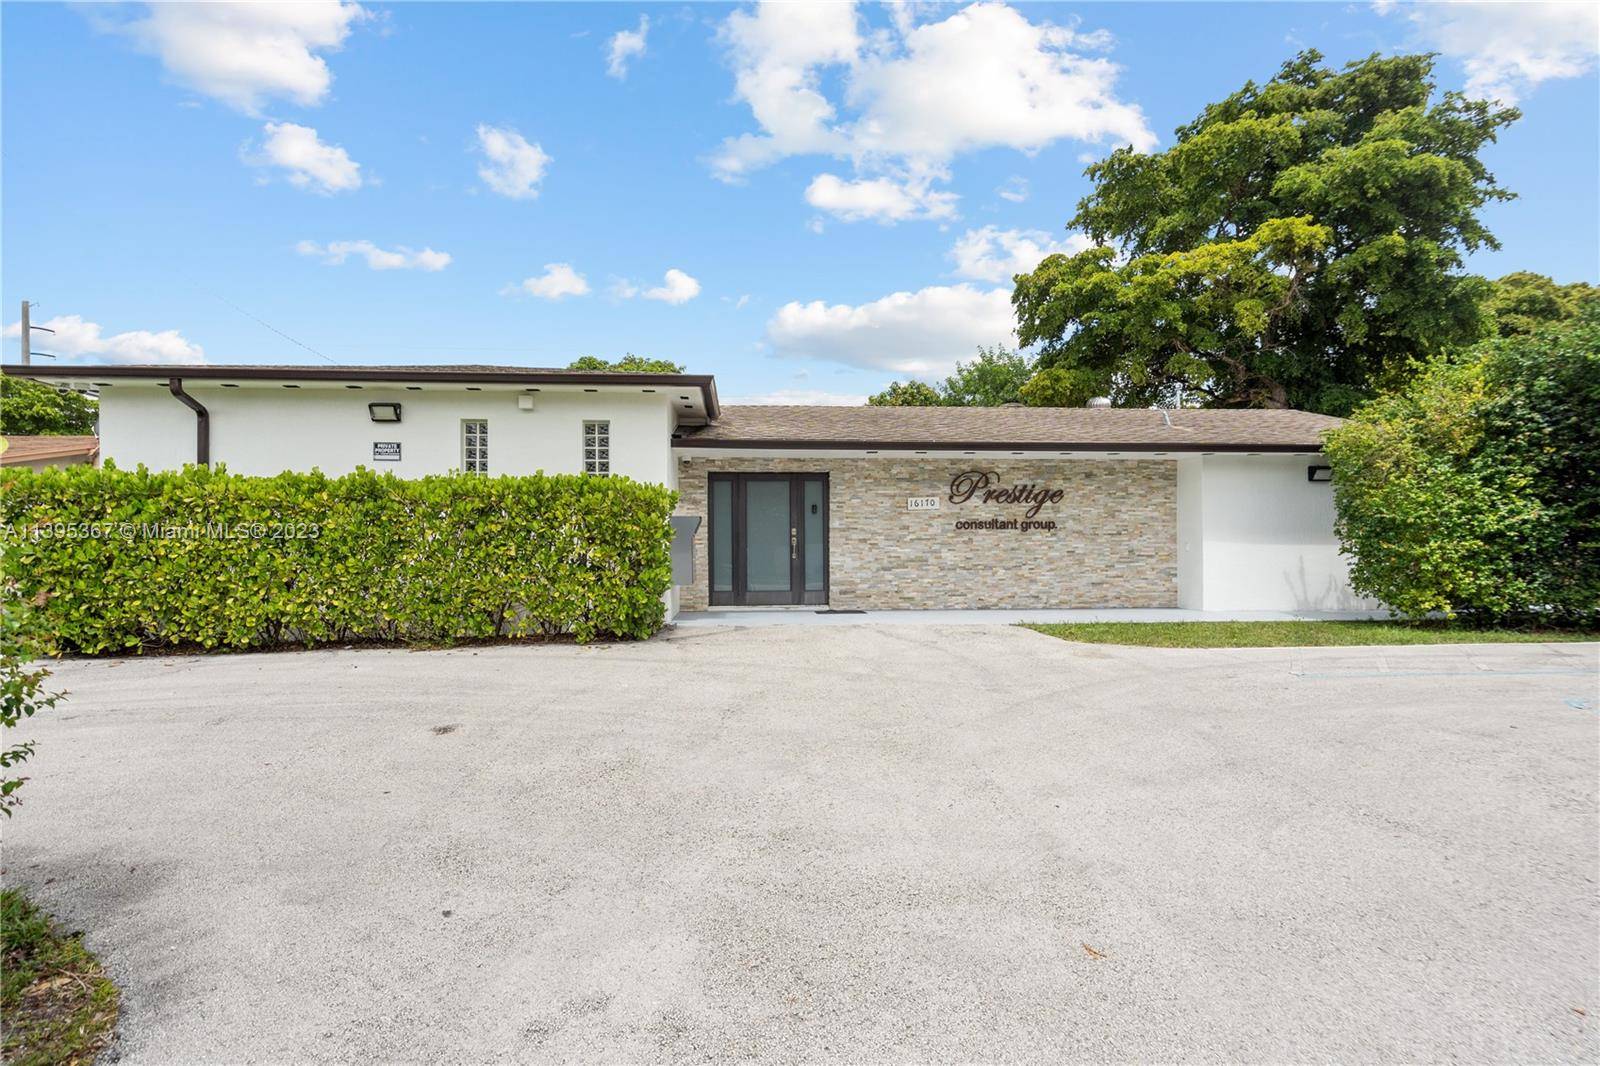 Free standing office building centrally located in the City of North Miami Beach.